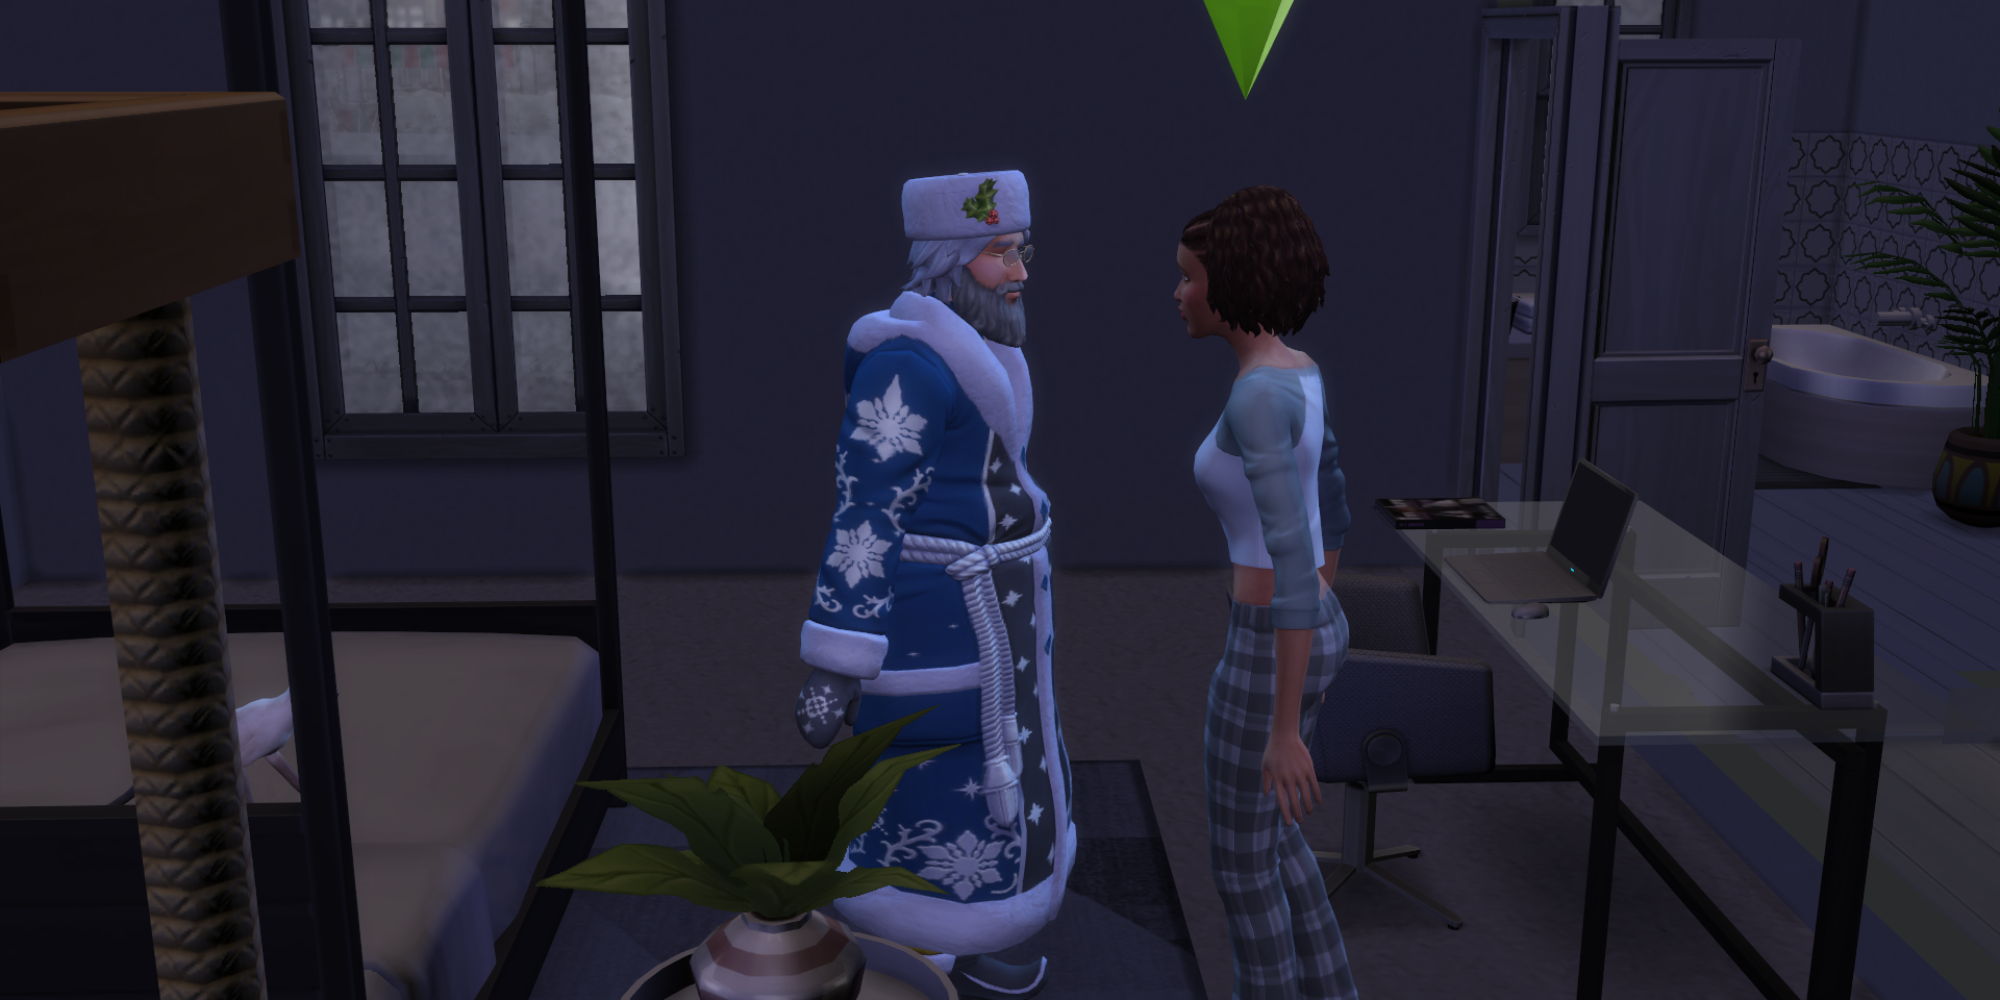 Romancing Father Winter in The Sims 4